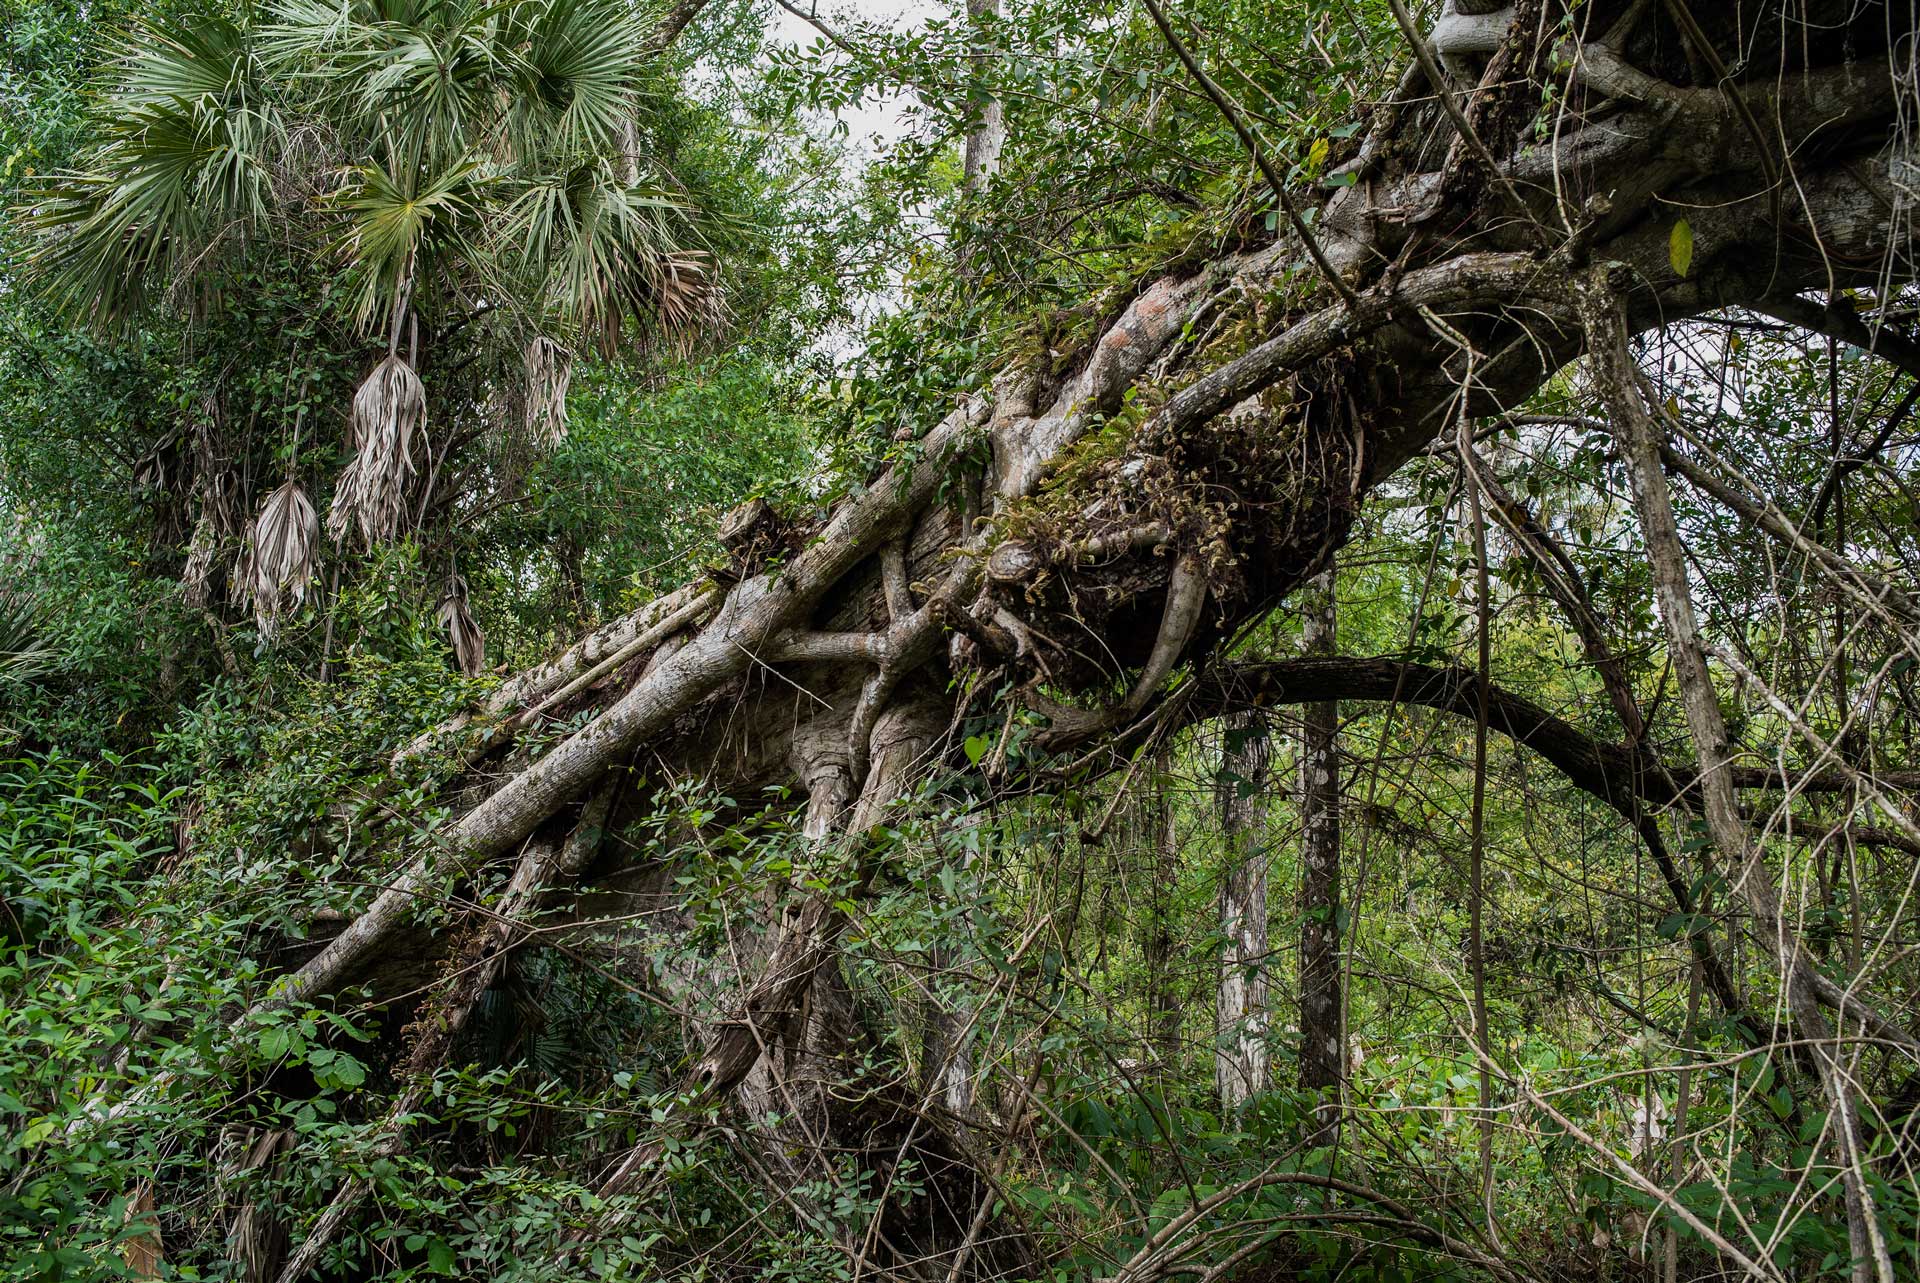 A strangler fig tree in the forest of the Everglades.